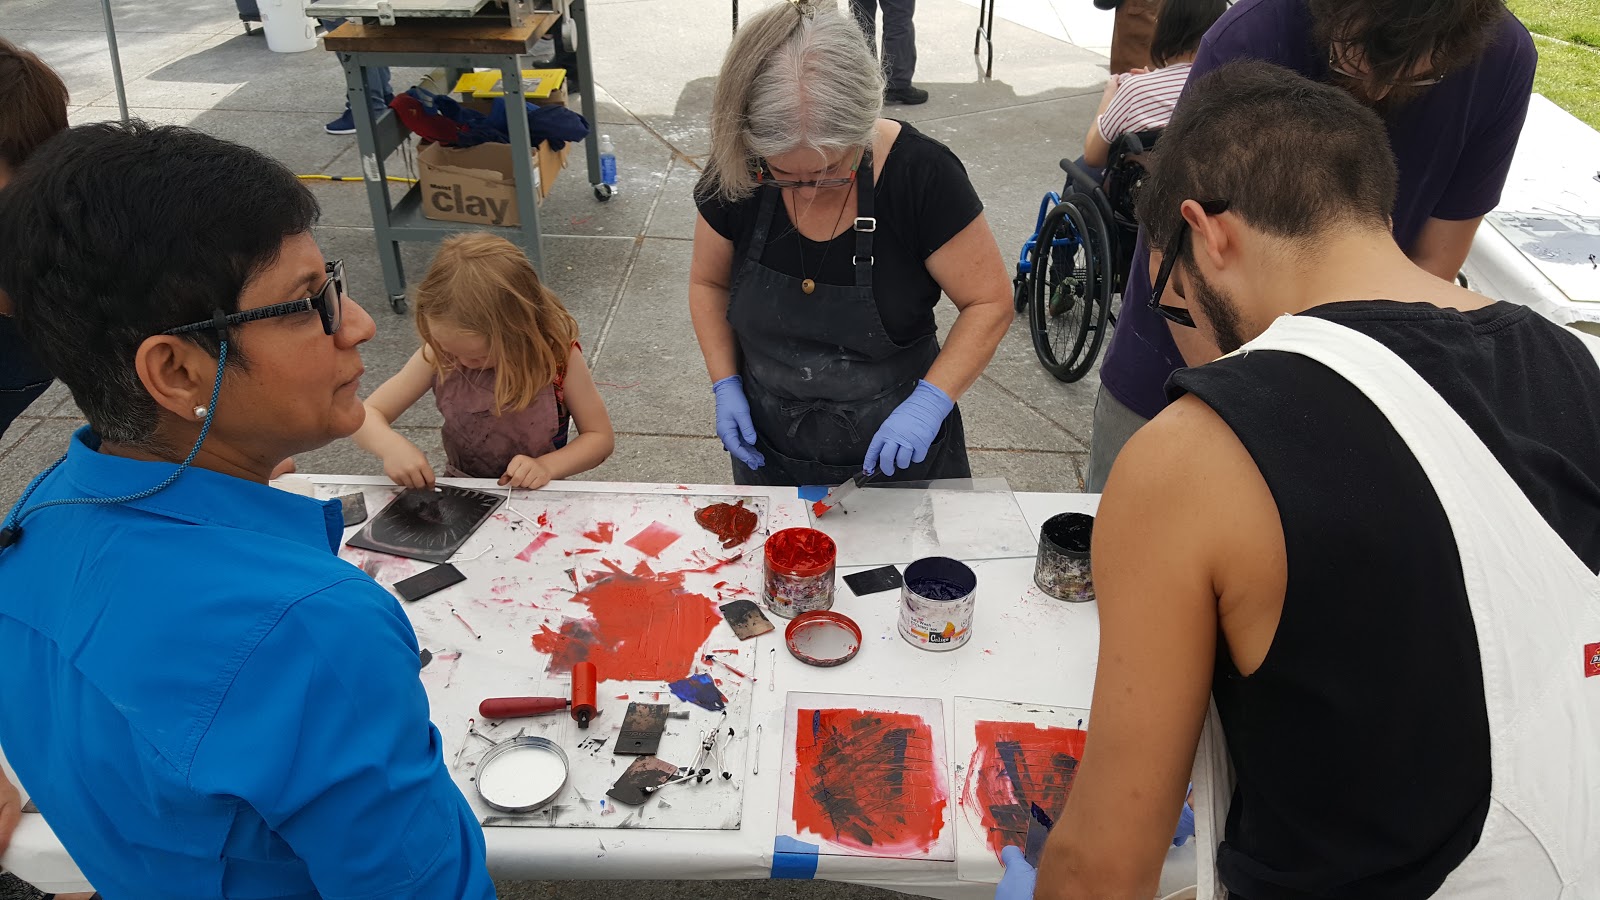 People doing art on a group table